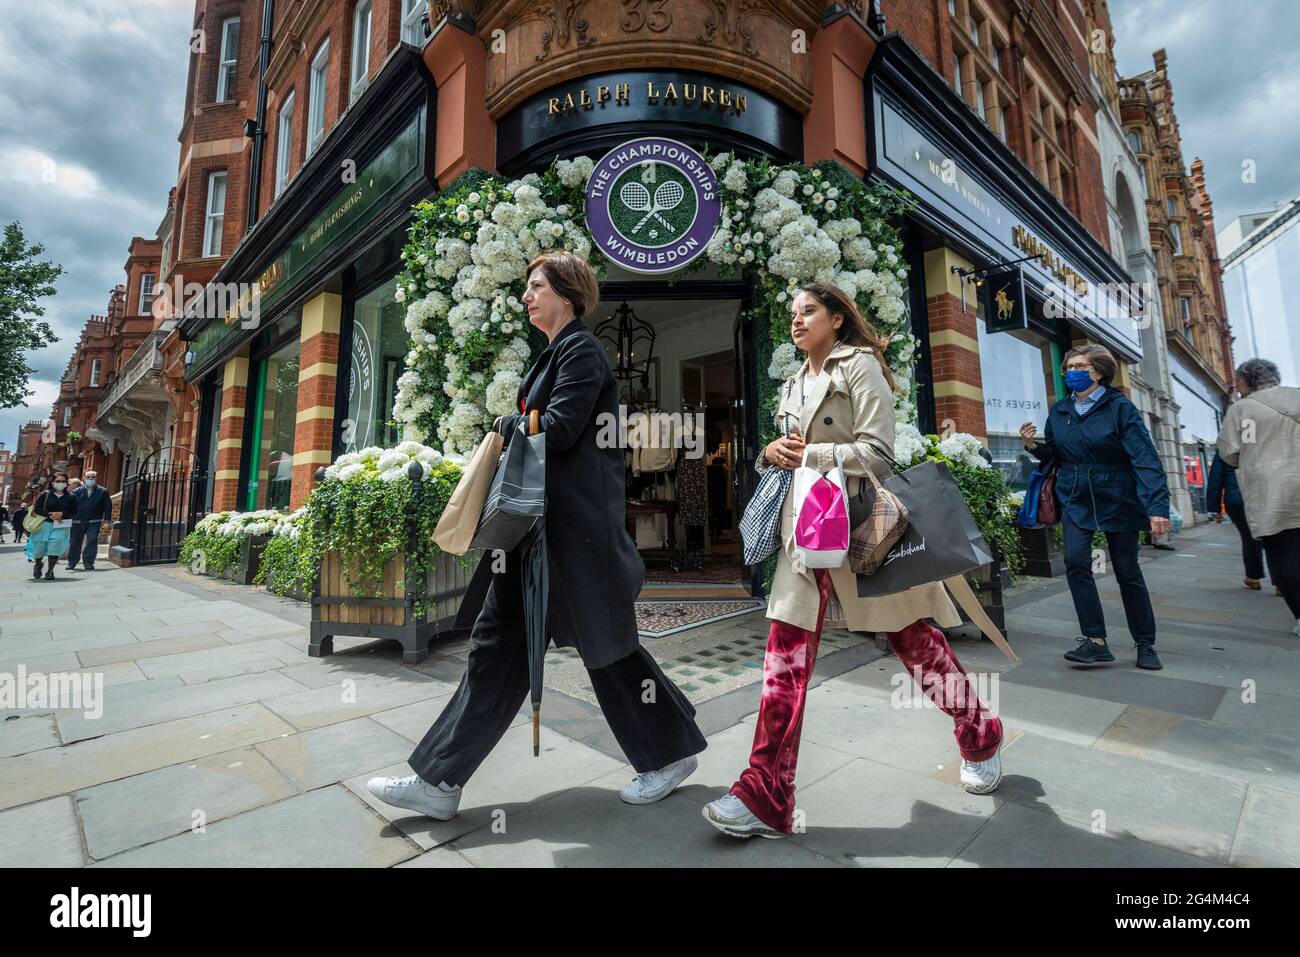 London, UK.  22 June 2021.  Women walk past the exterior of the Ralph Lauren store in Sloane Square, decorated ahead of this year’s upcoming Wimbledon tennis championships at the All England club. Ralph Lauren supplies outfits for officials at the event.  Lockdown restrictions will limit crowds, but the finals will be at full capacity when restrictions are relaxed.  Credit: Stephen Chung / Alamy Live News Stock Photo